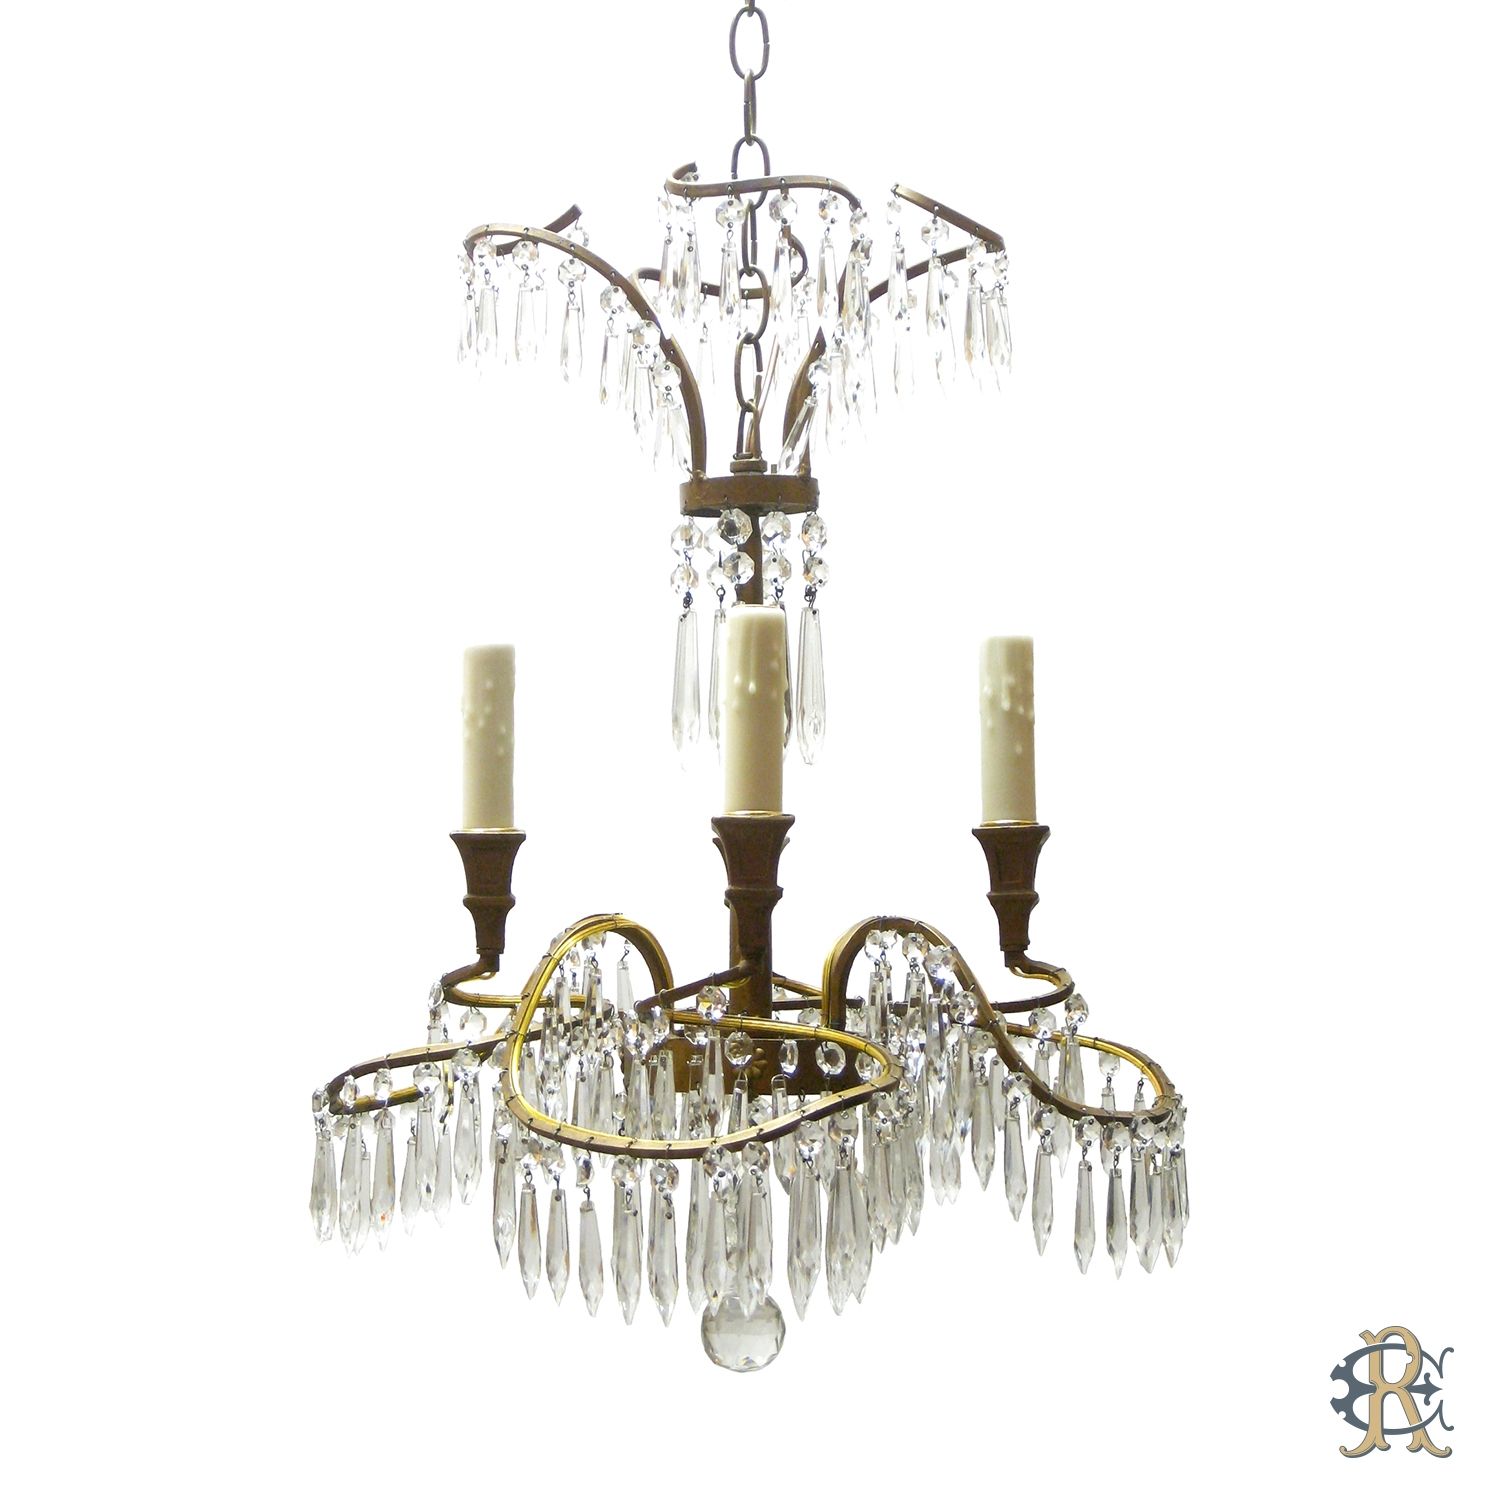 Four Light Baltic Style Italian Chandelier Edgar Reeves Lighting Inside Italian Chandelier Style (View 8 of 15)